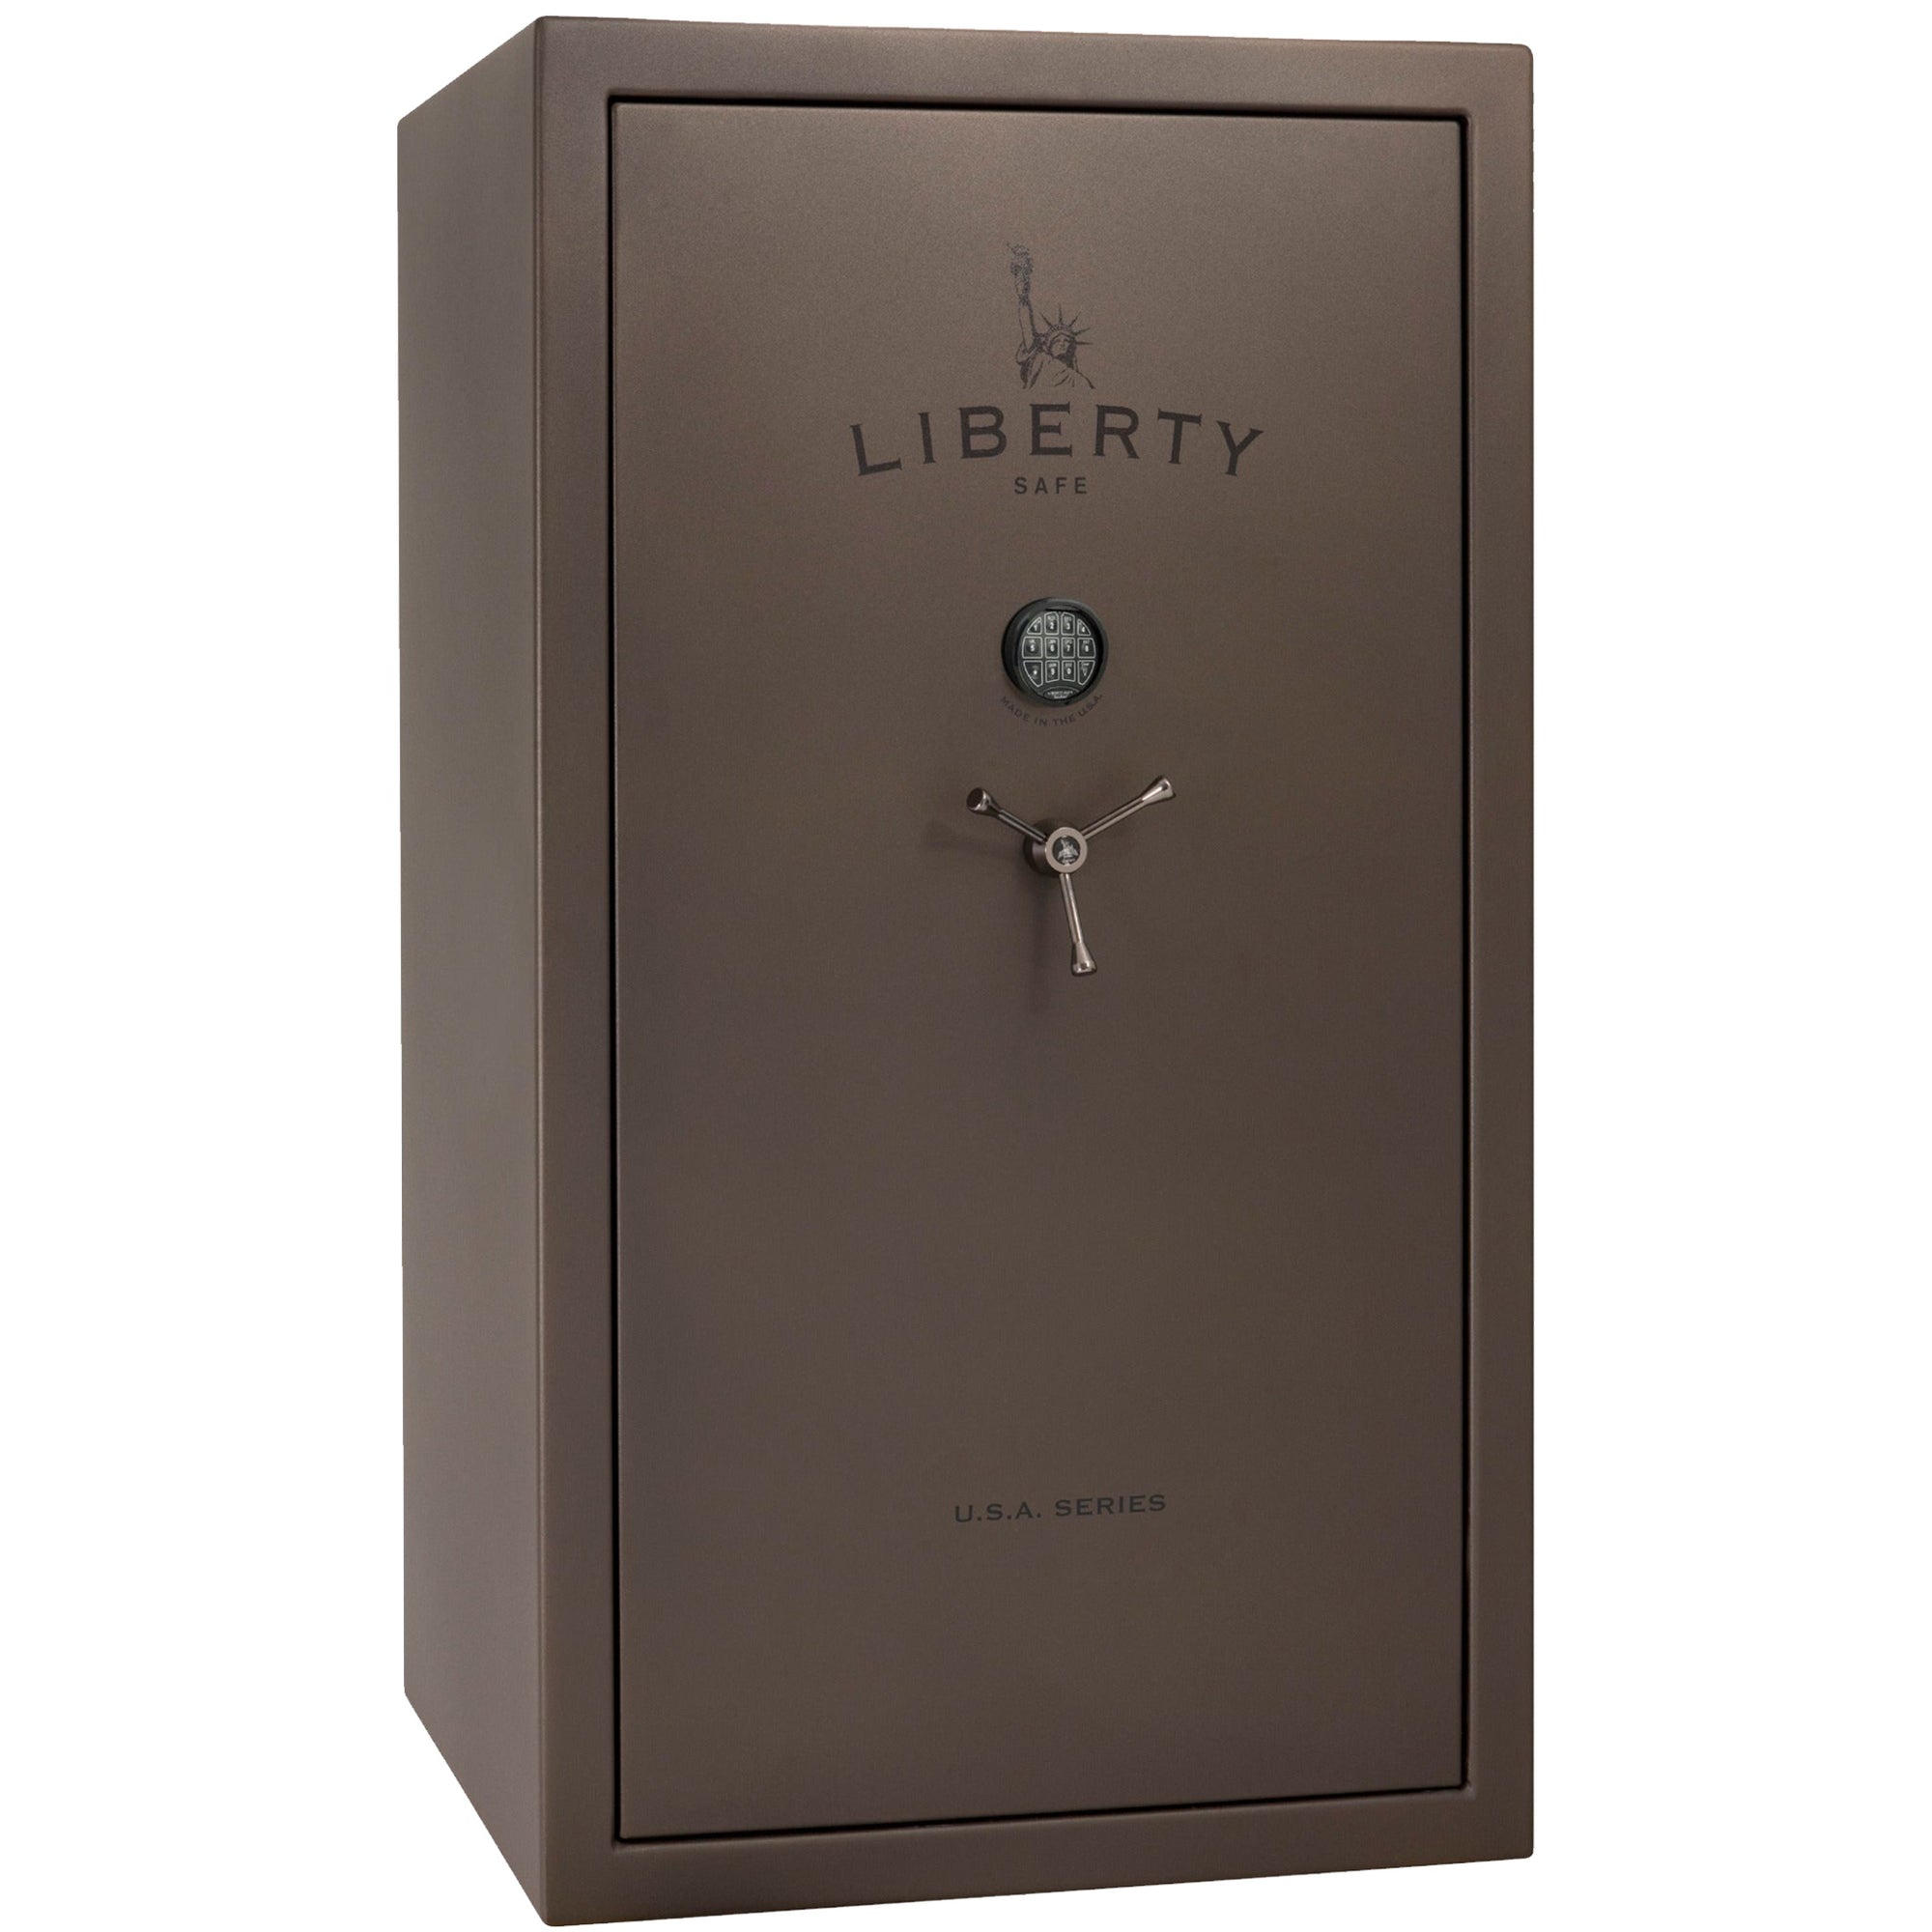 USA 50 Textured Bronze Elock 72.5"(H) x 42"(W) x 27.5"(D) | 60 Minute Fire Protection | Level 3 Security - Closed Door